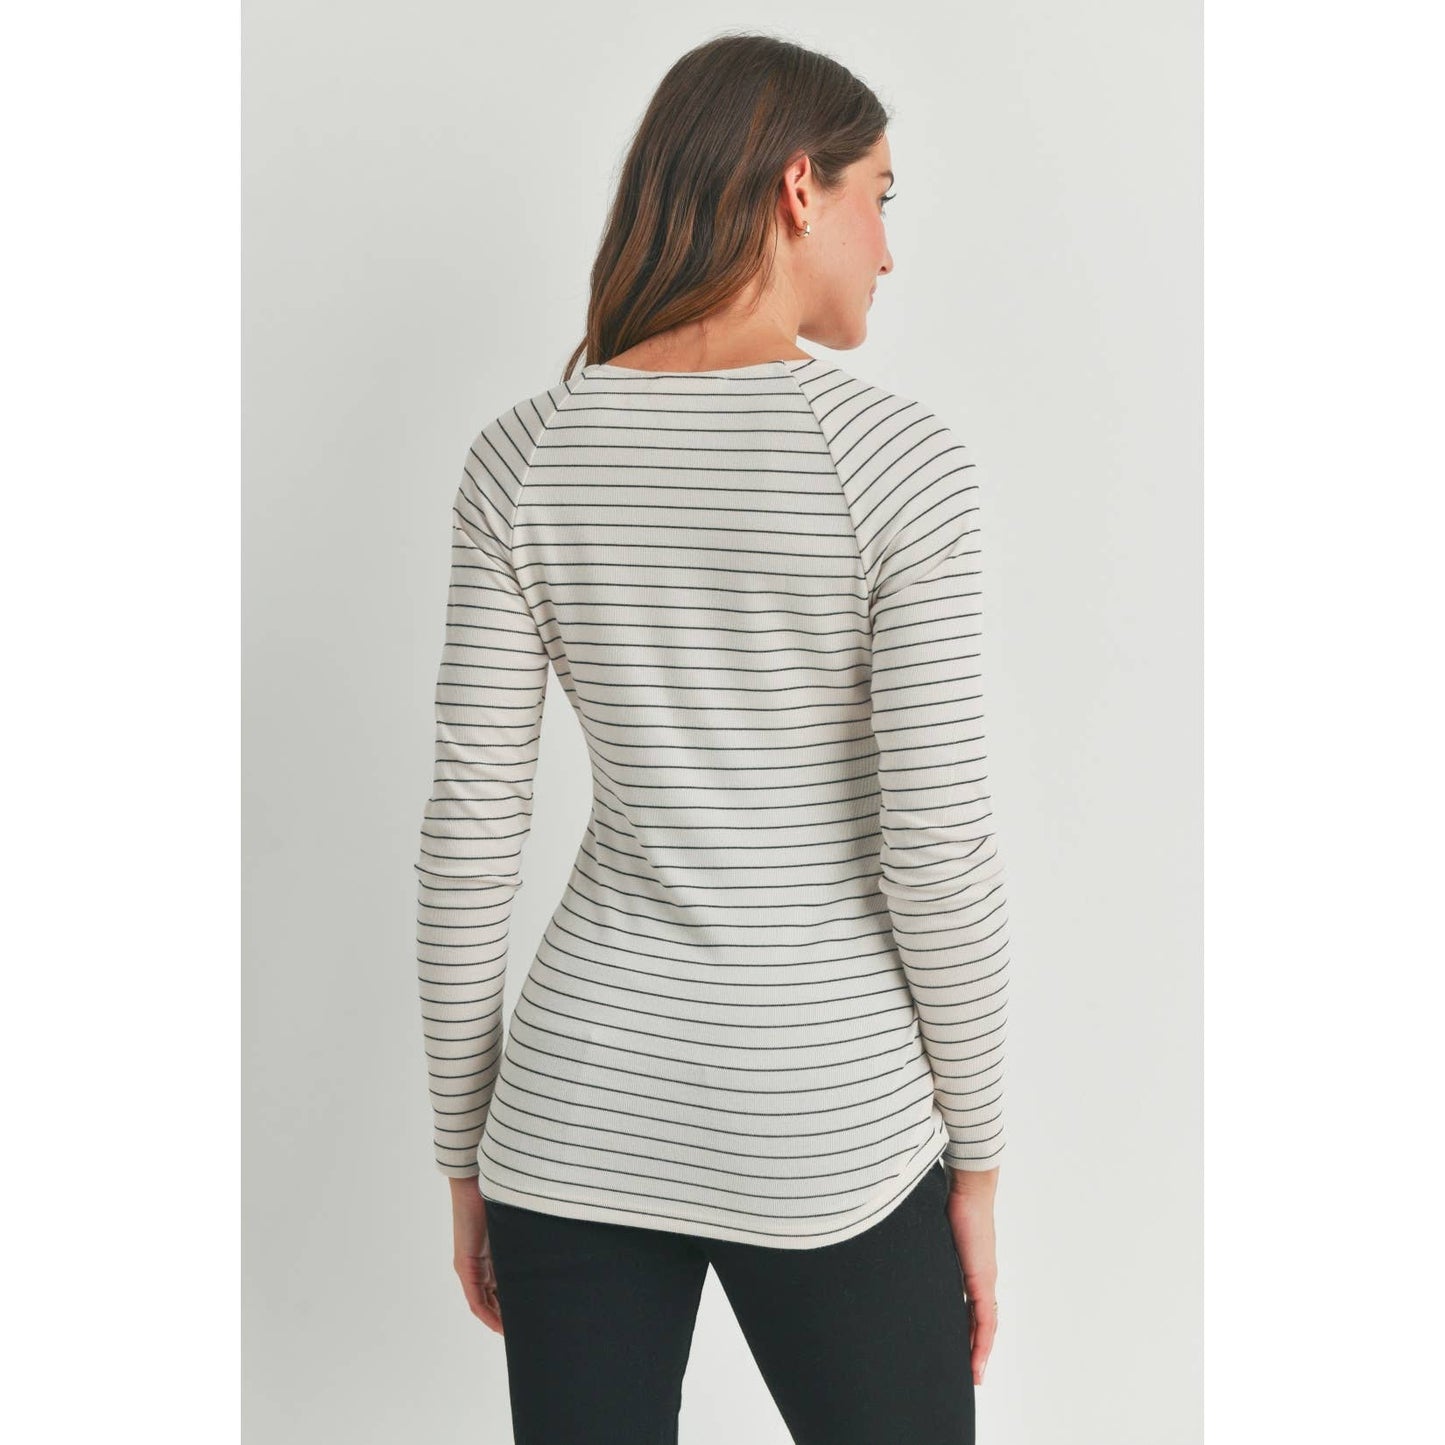 Stripe Maternity Nursing Top with Button Detail